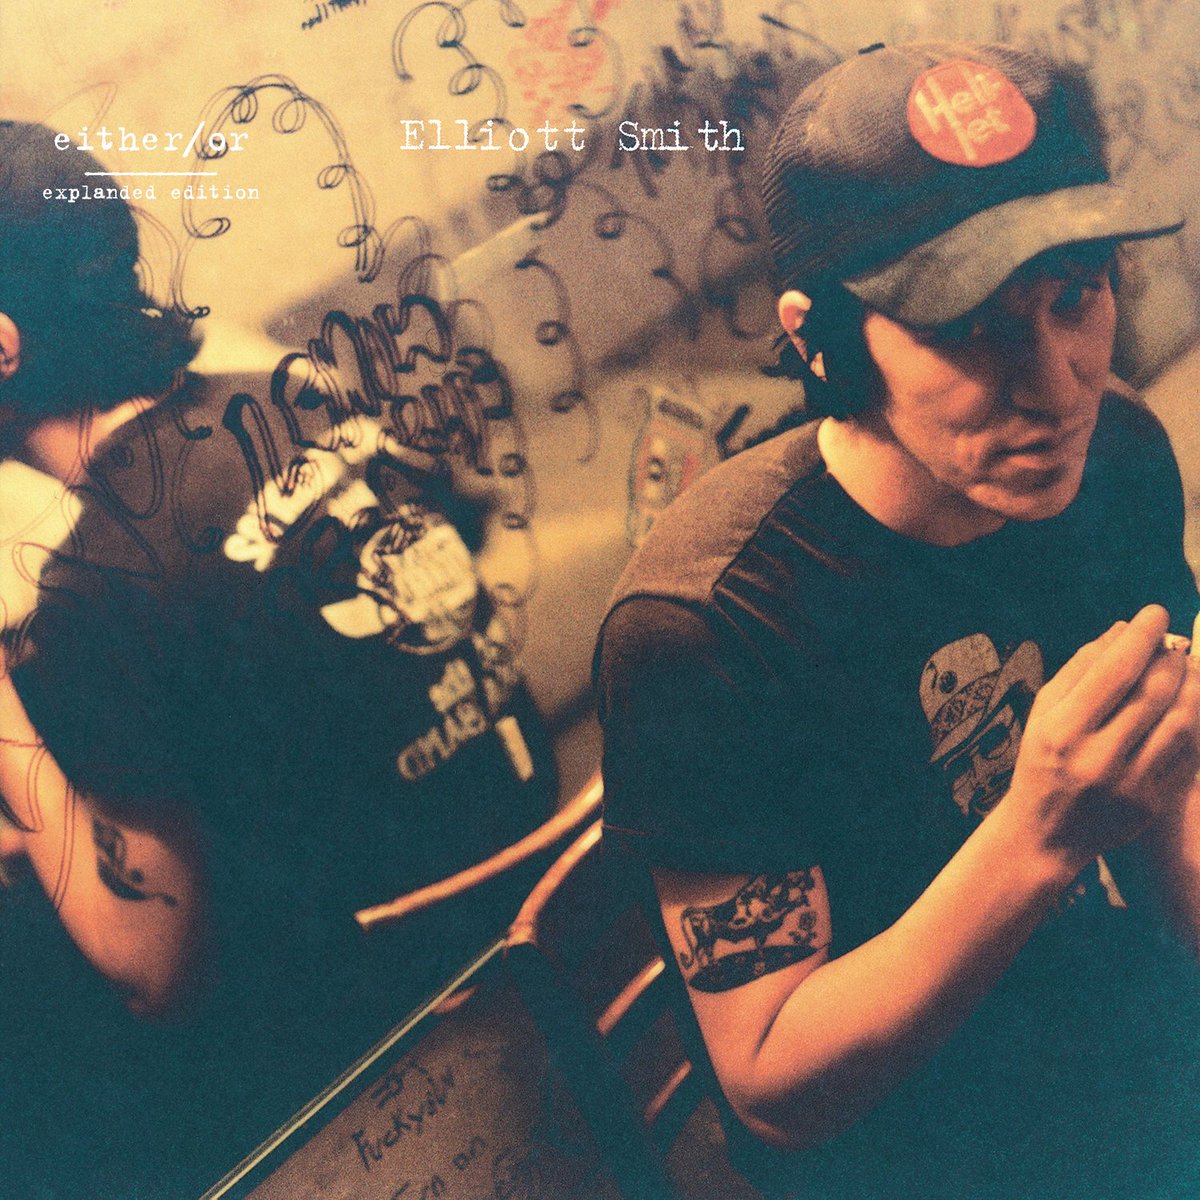 4. Elliott Smith Elliott Smith stated that he was inspired to become a musician because of the Beatles' White Album, and that he was an avid fan of the band since the age of 4. He recorded and performed many Beatles covers over the course of his career.